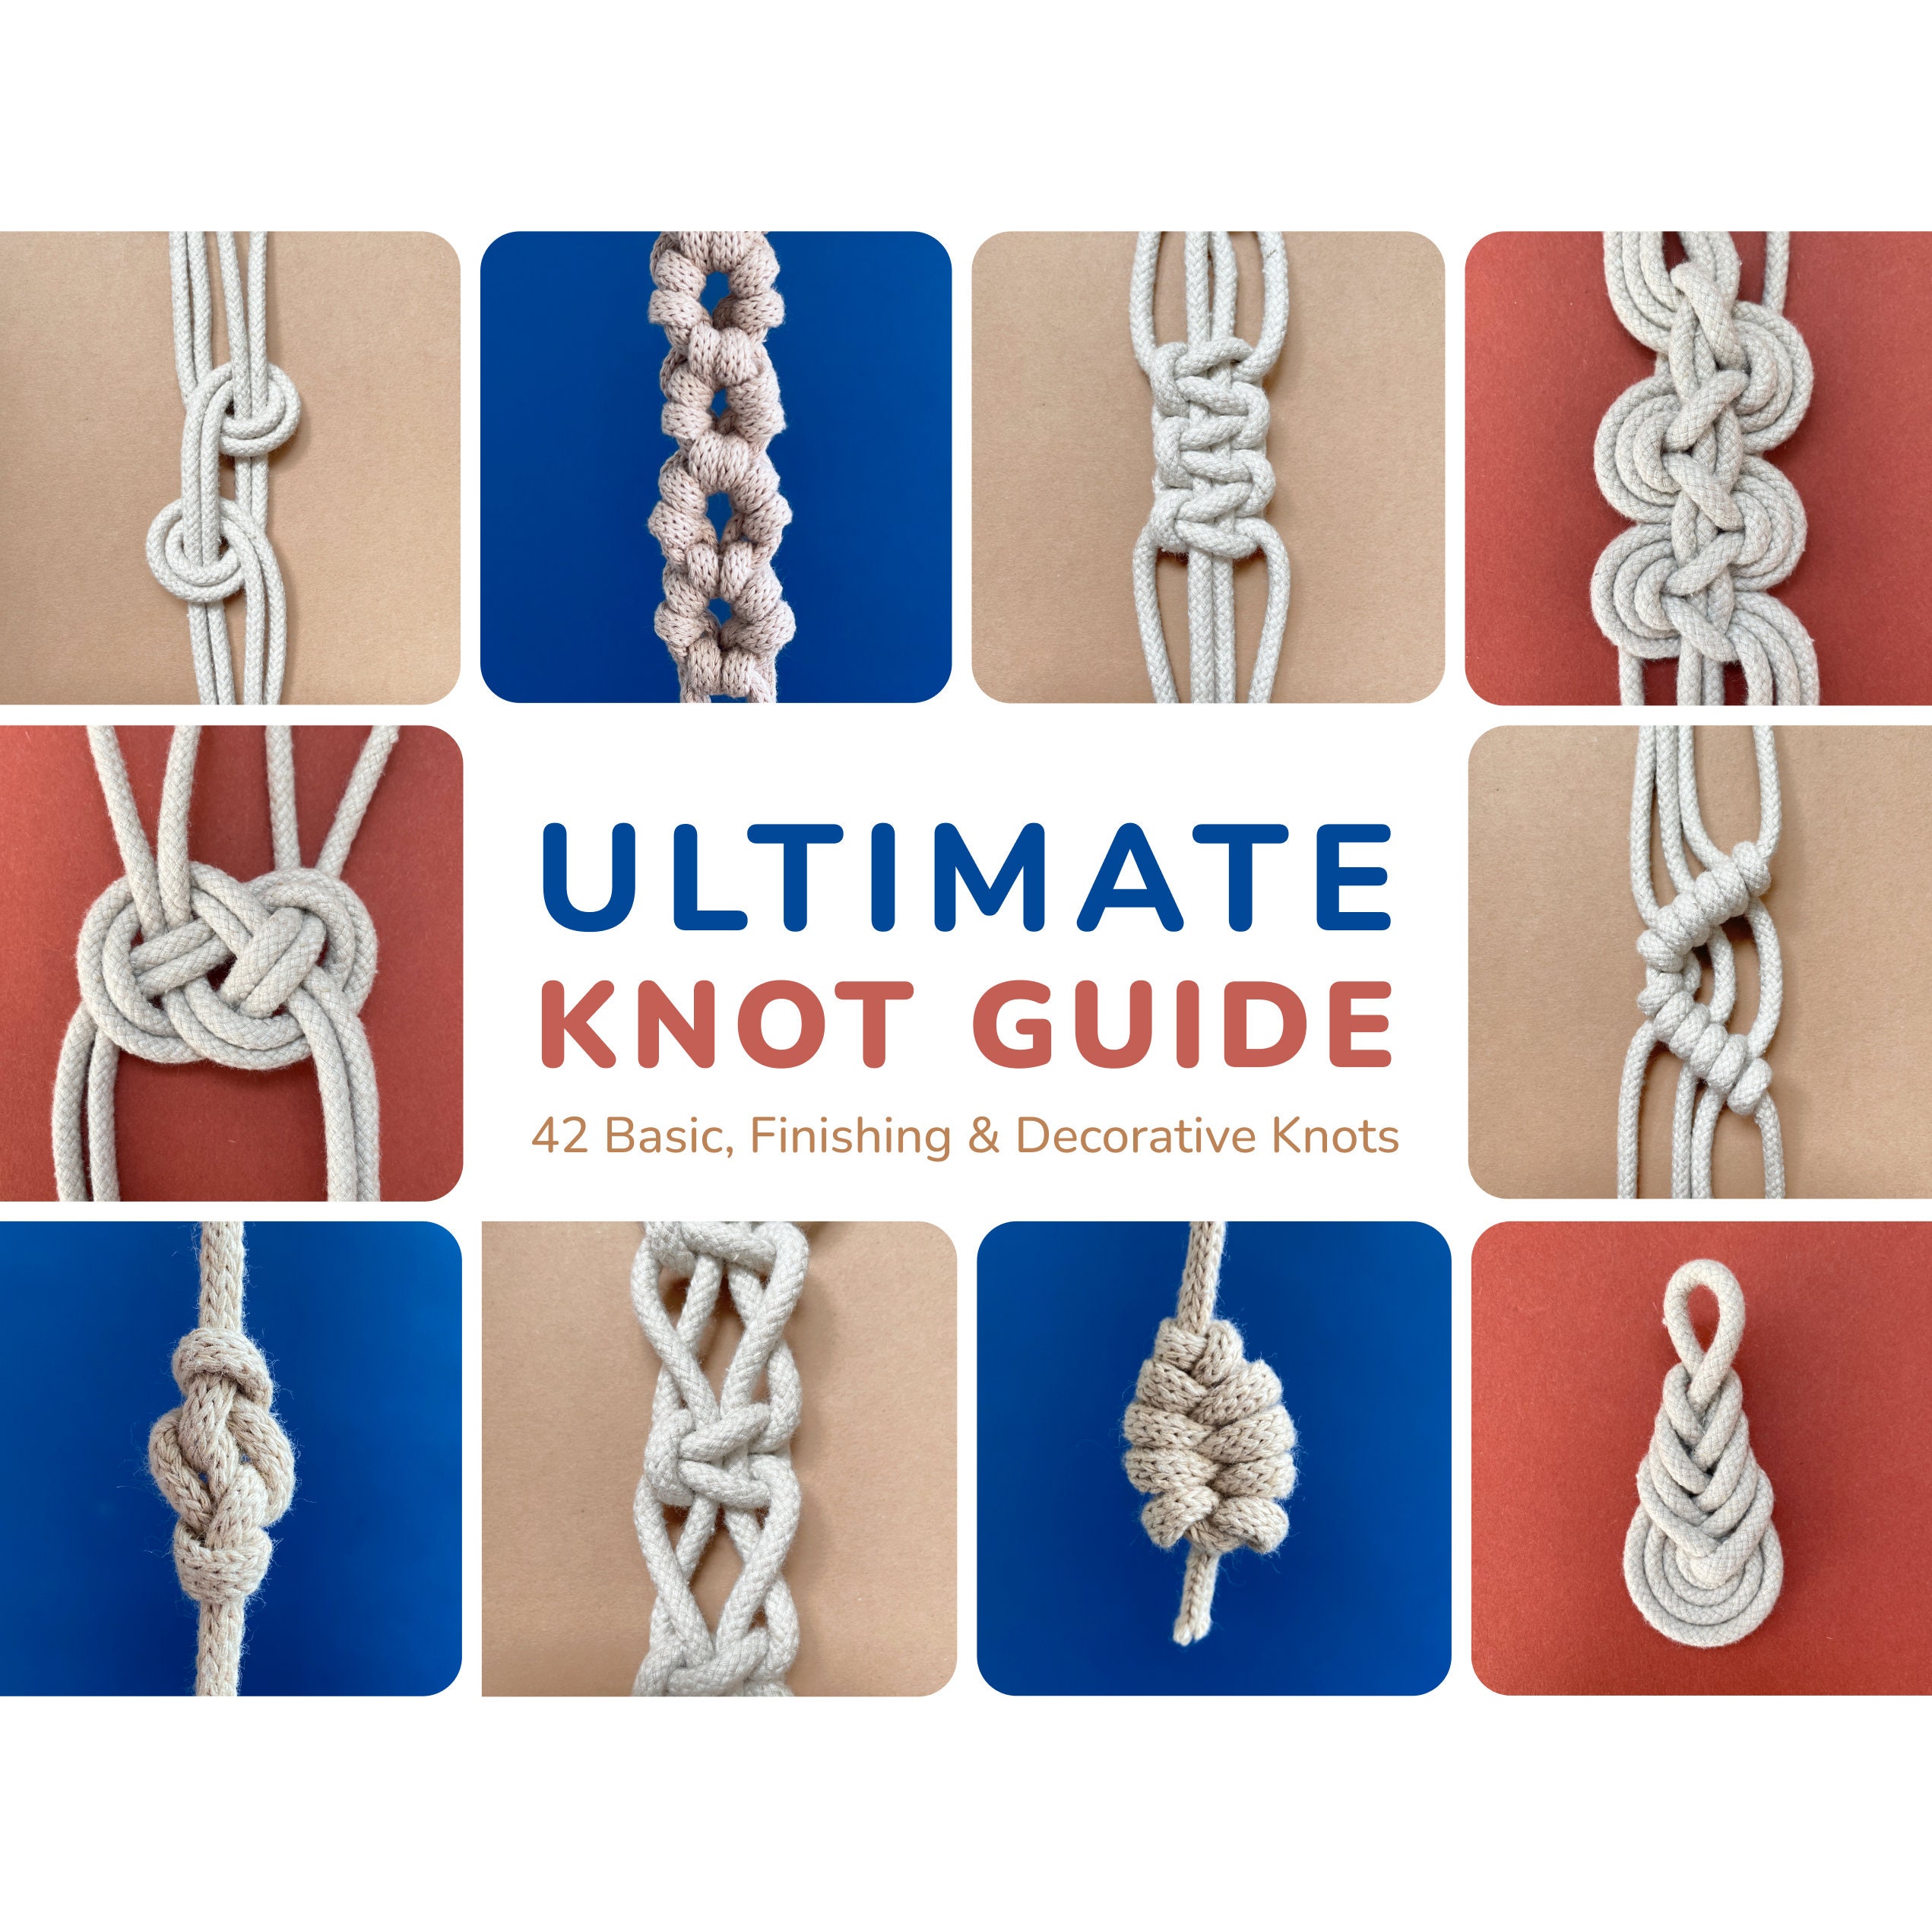 Macramé Magic – 6 Books in 1 Beginner's Bible: Make Your Own Beautiful Home  Decor One Knot at Time with Step by Step Illustrated Instructions See more